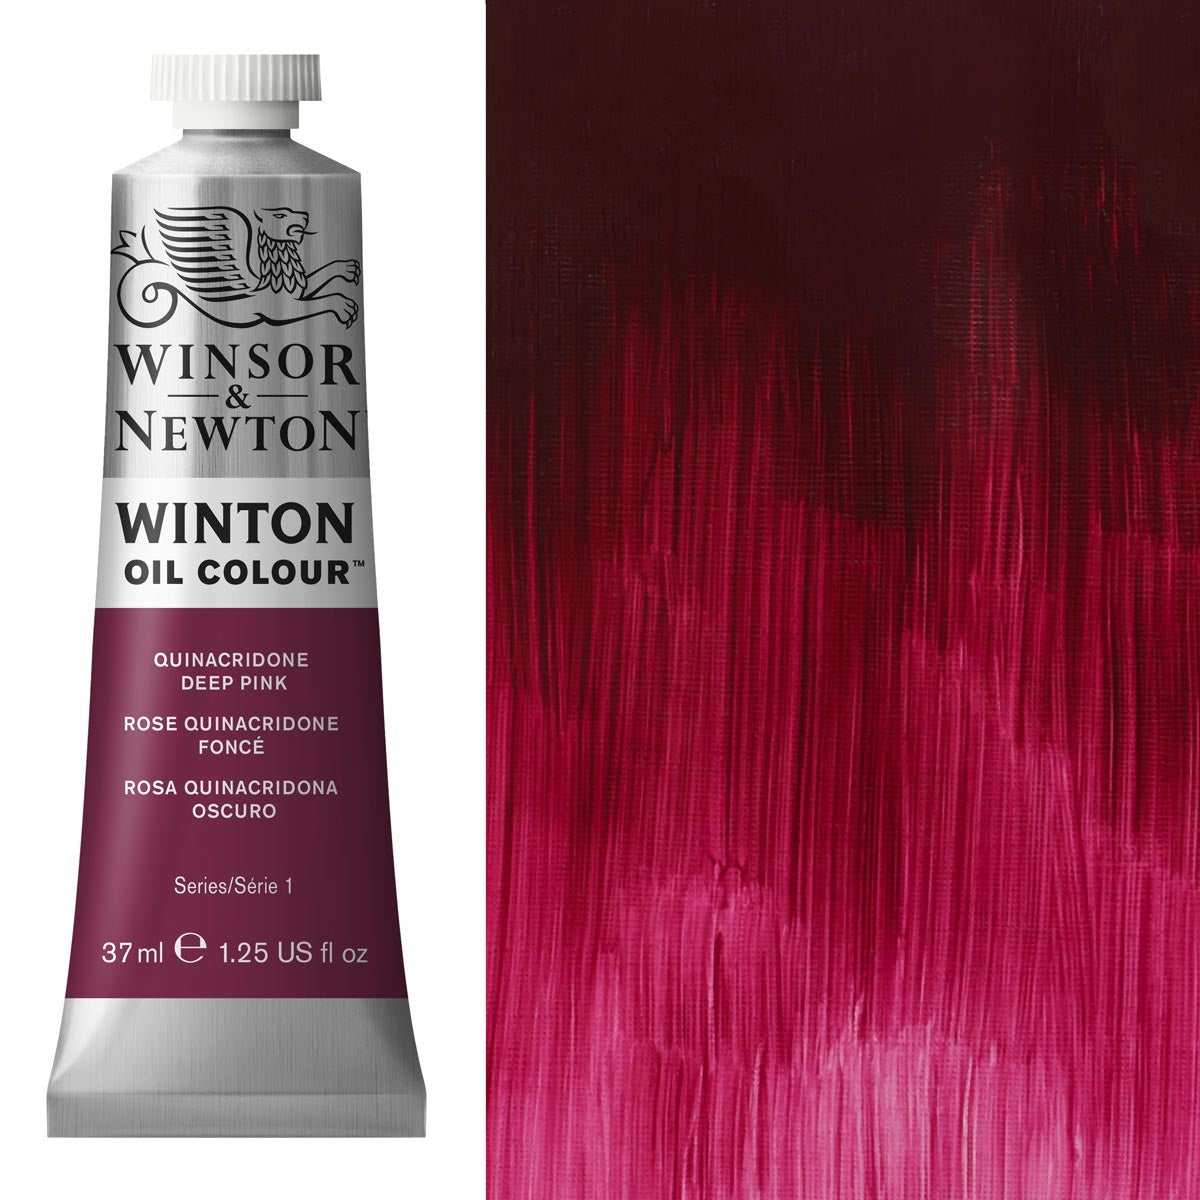 Winsor and Newton - Winton Oil Colour - 37ml - Quinacridone Deep Pink